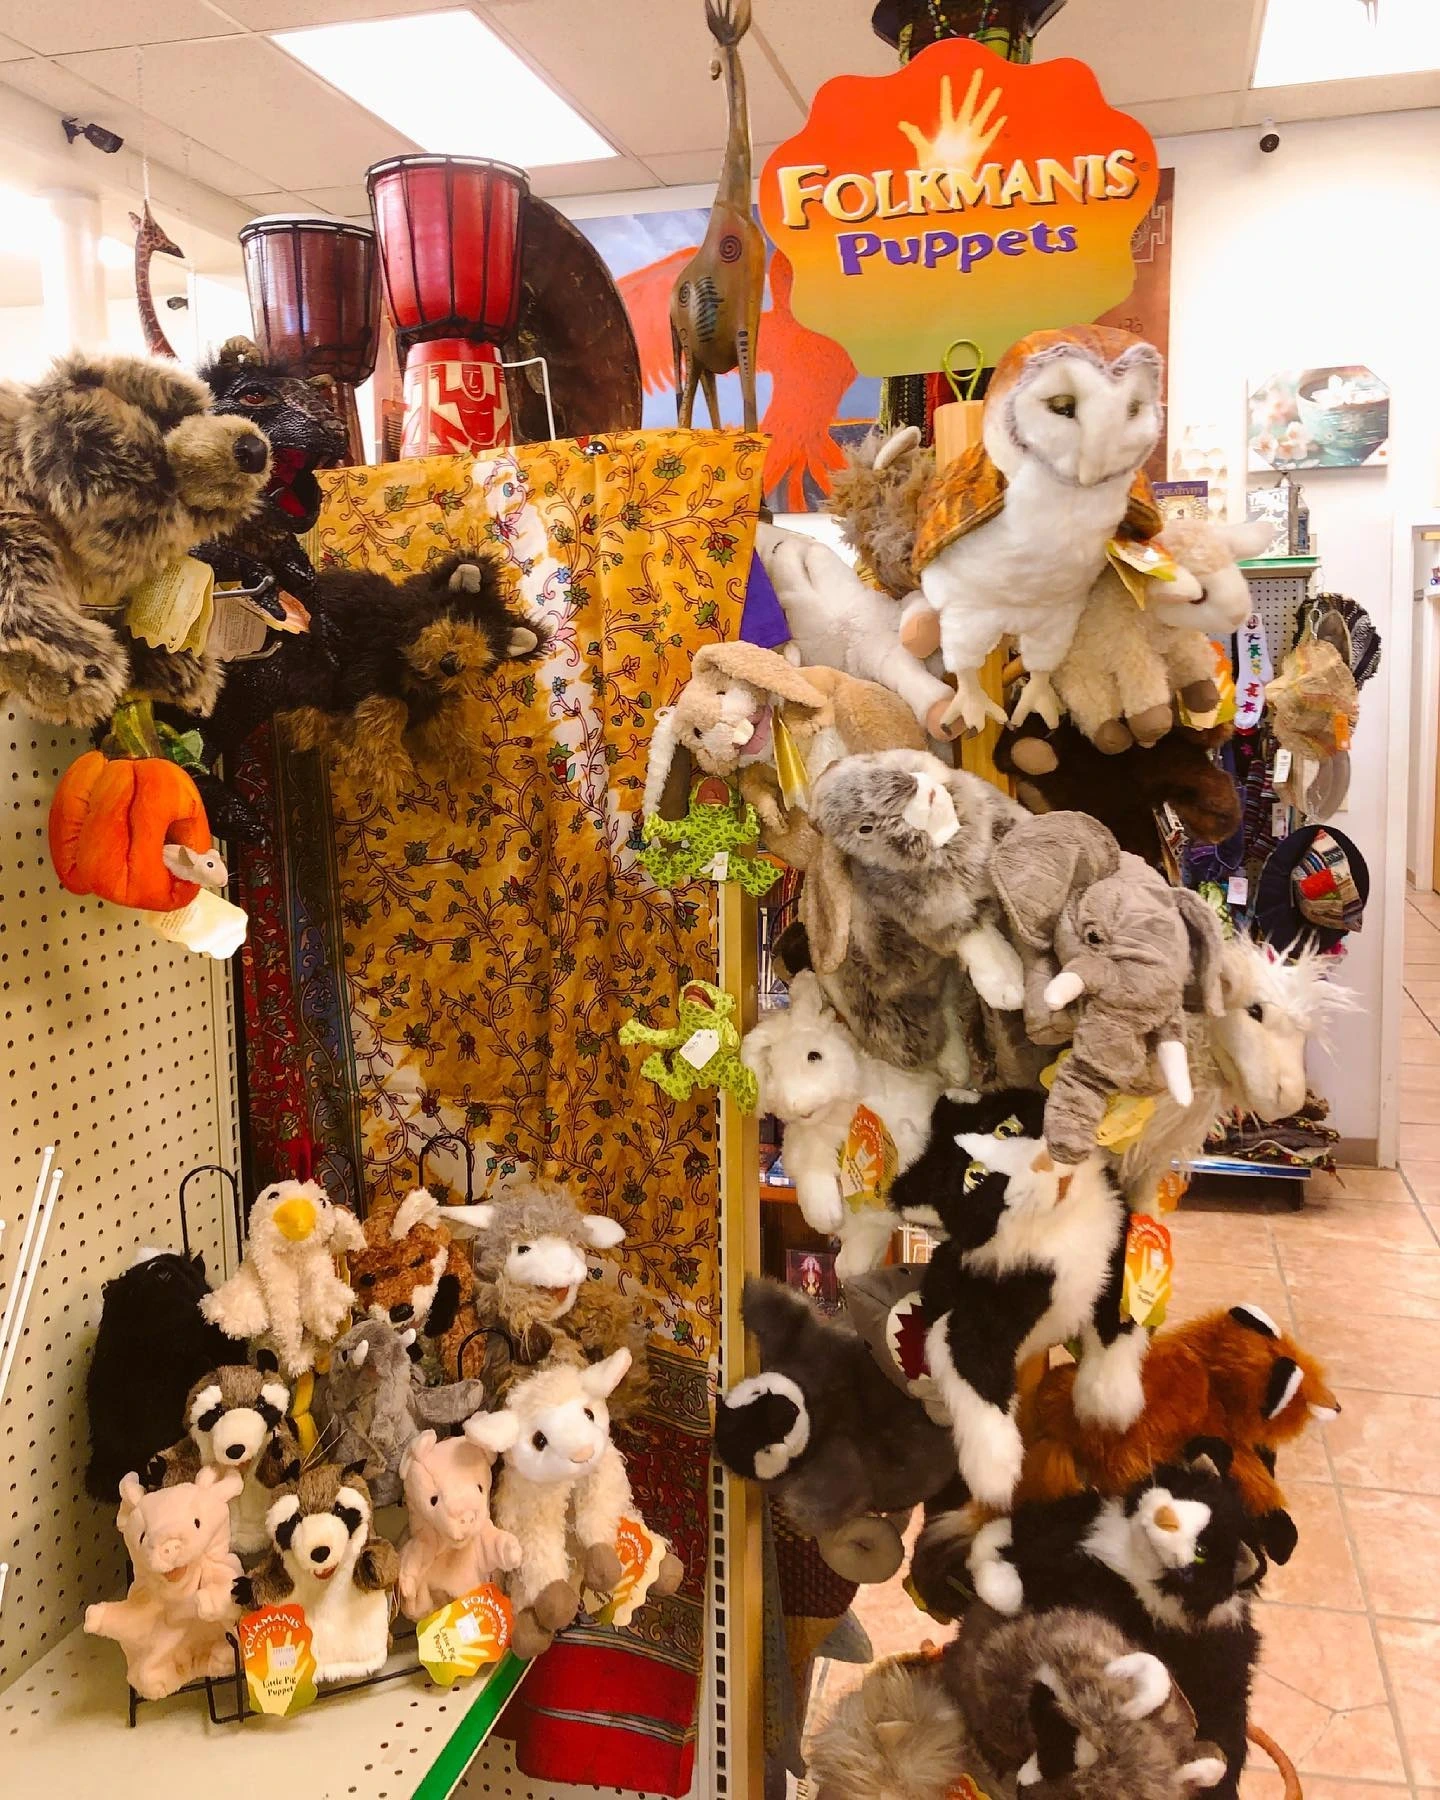 A display of stuffed animals and puppets